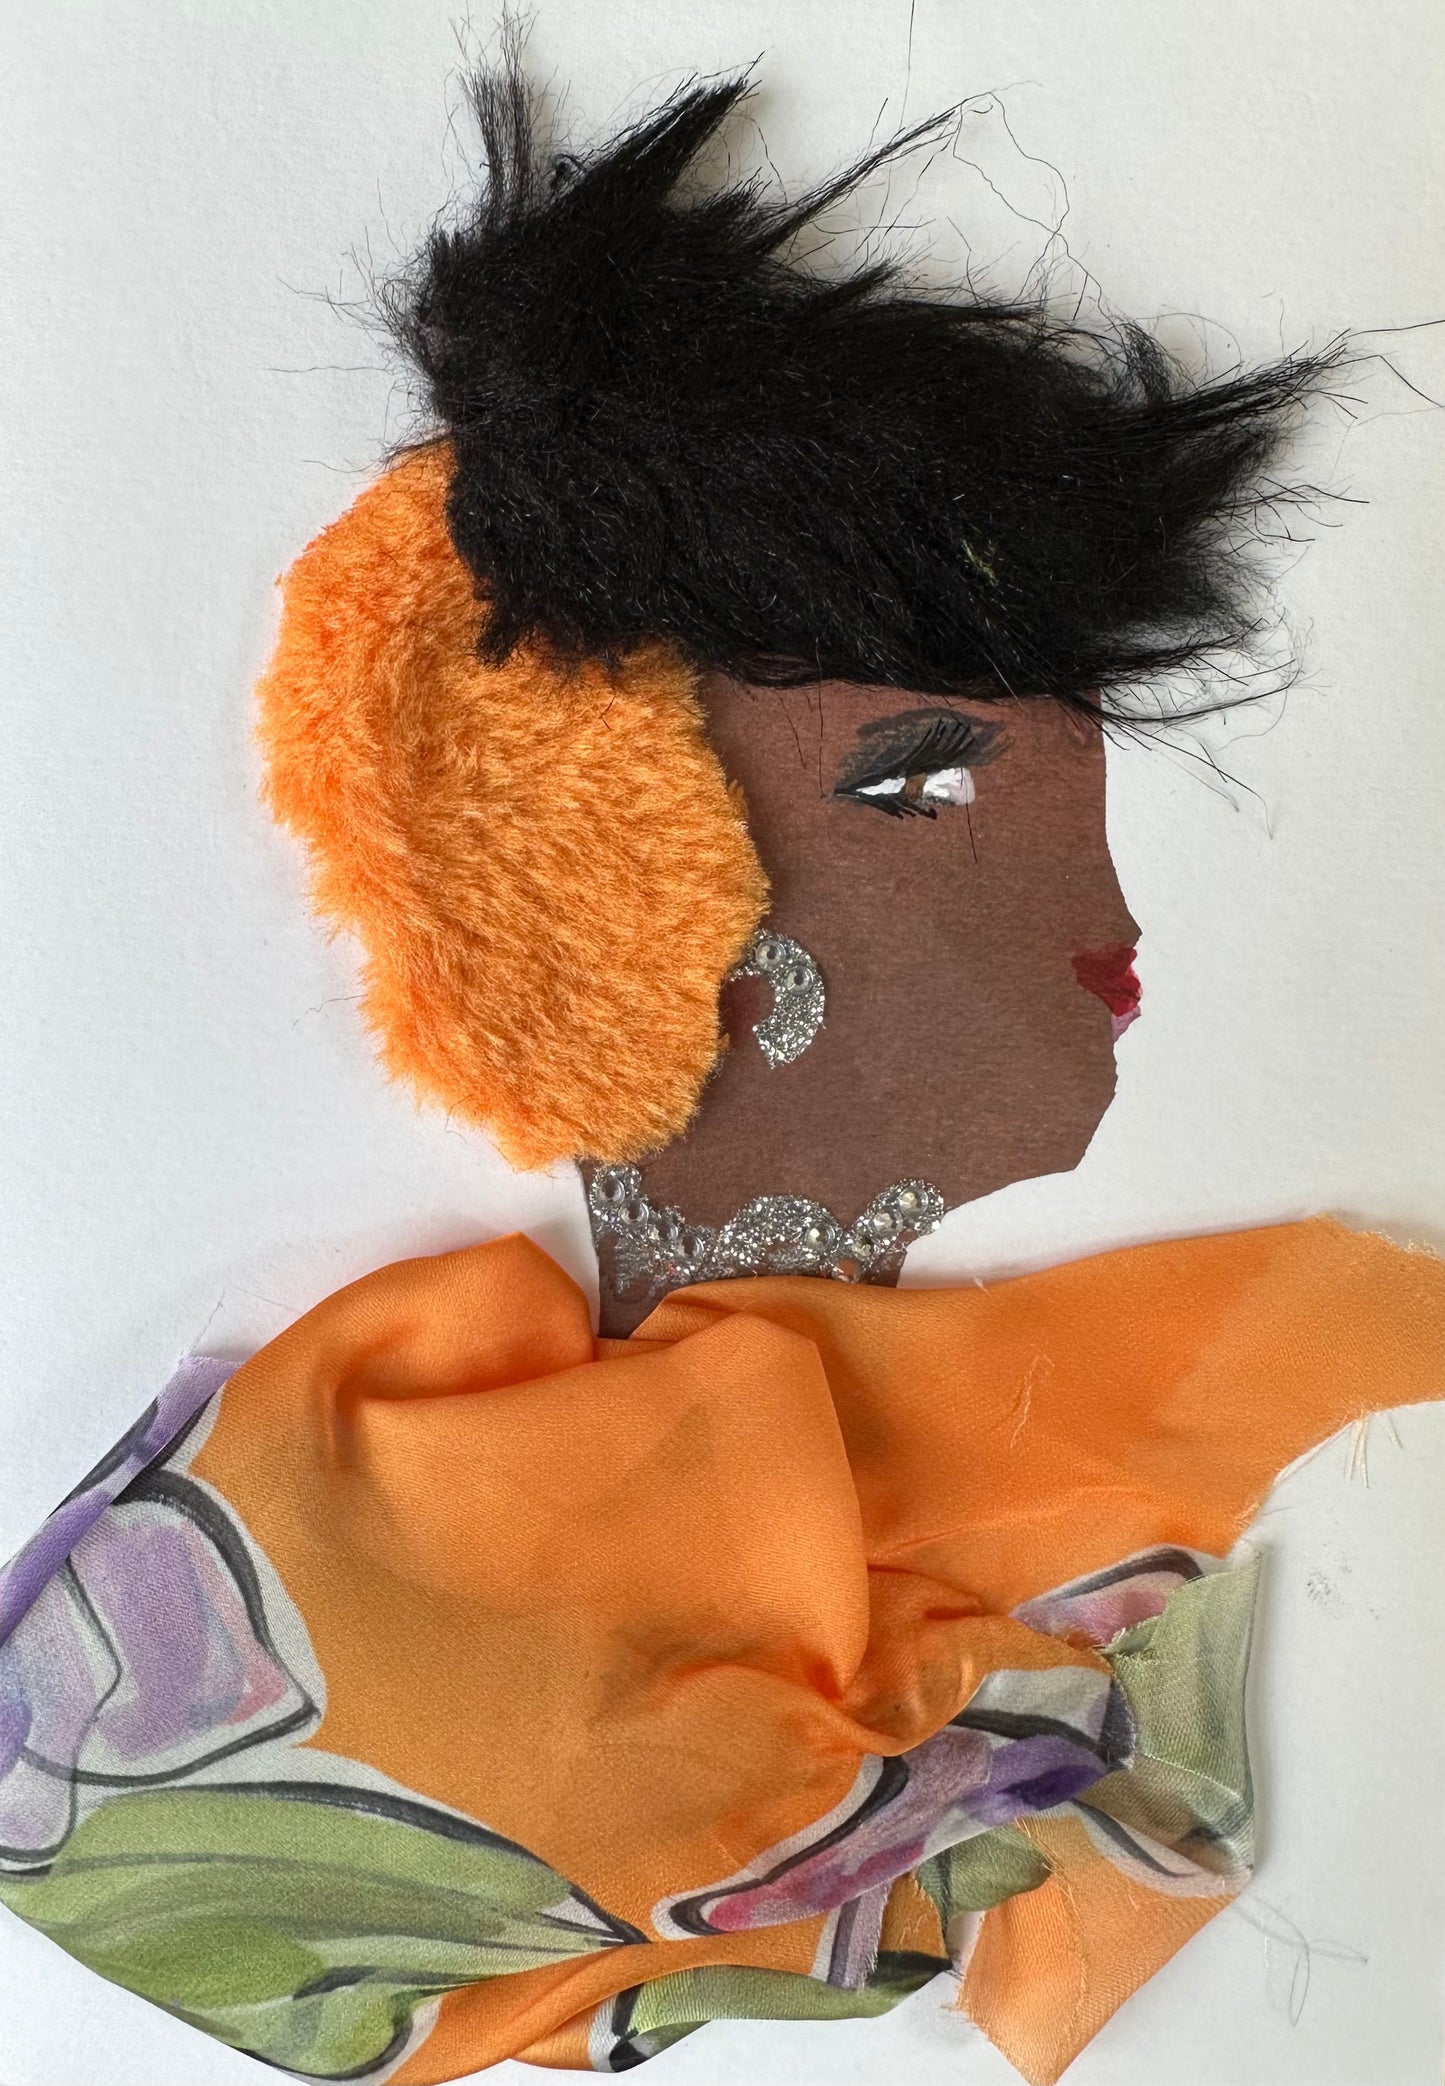 I made this handmade card of a woman dressed in an orange blouse that is patterned with lavender purple flowers with light, sage green leaves. Her hair is black on the top and orange towards the bottom. The outfit is finalized with diamond-like gemstones for her necklace and earrings.